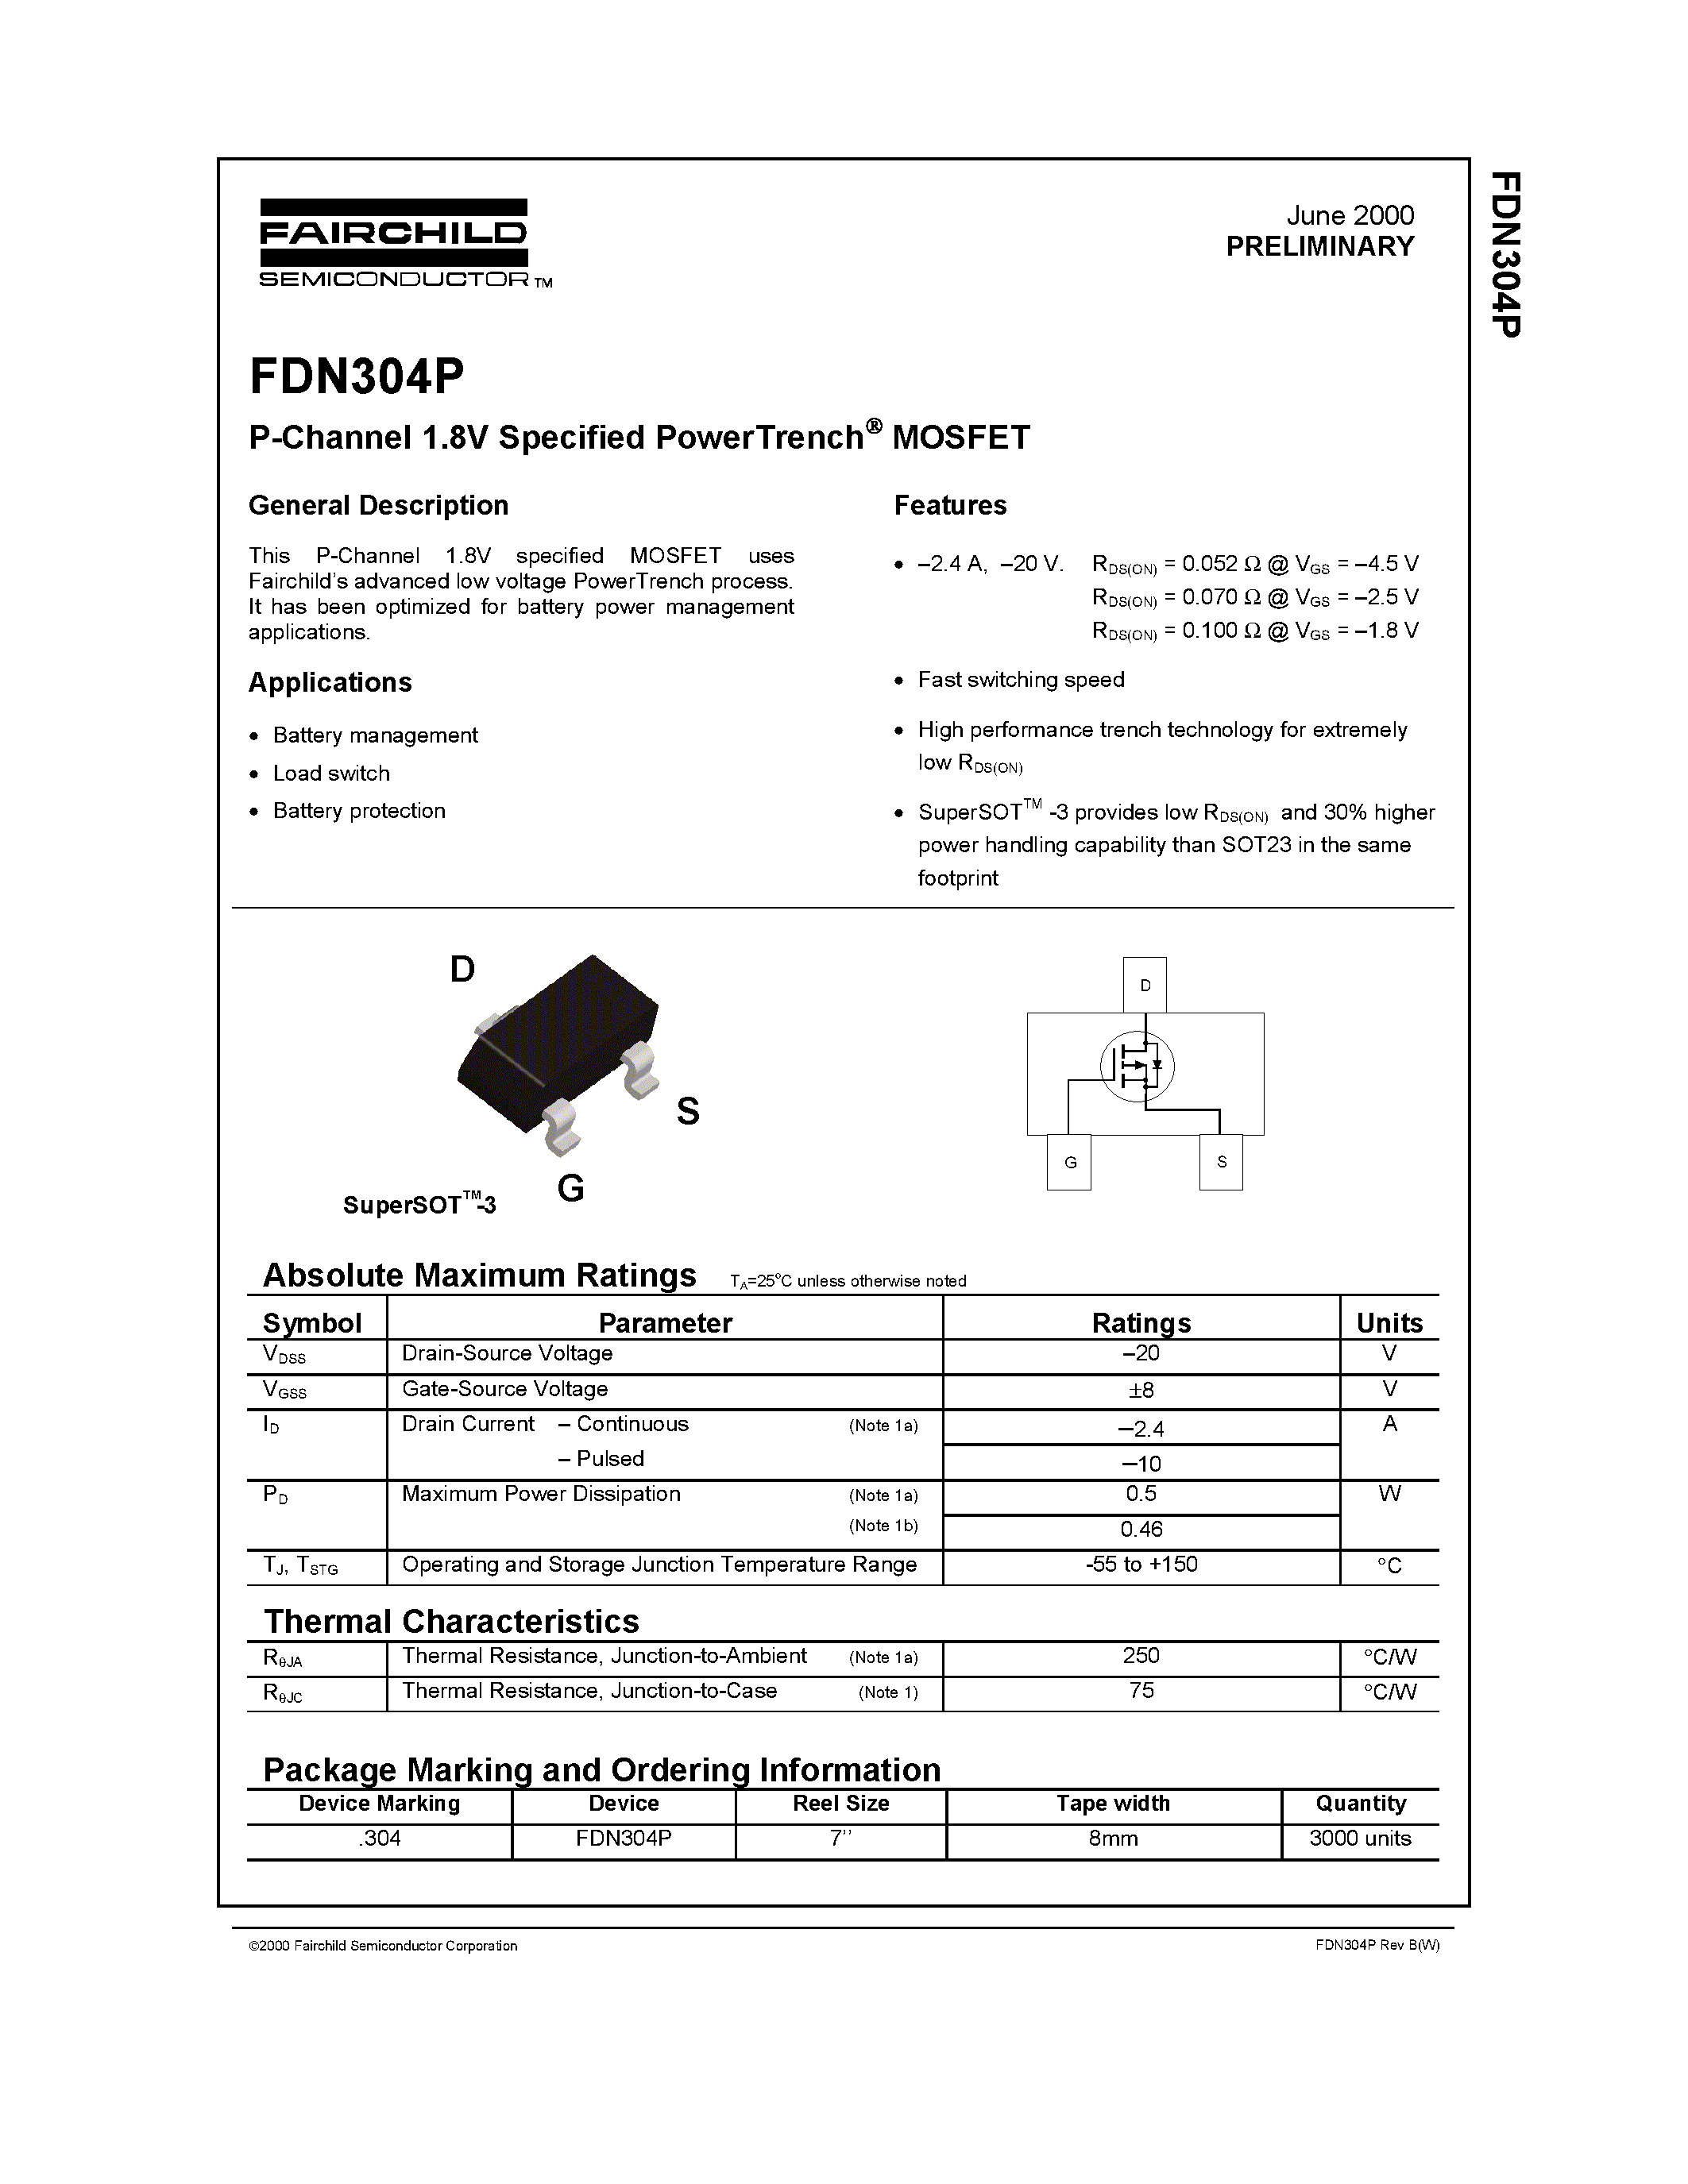 Даташит FDN304P-P-Channel 1.8V Specified PowerTrench MOSFET страница 1